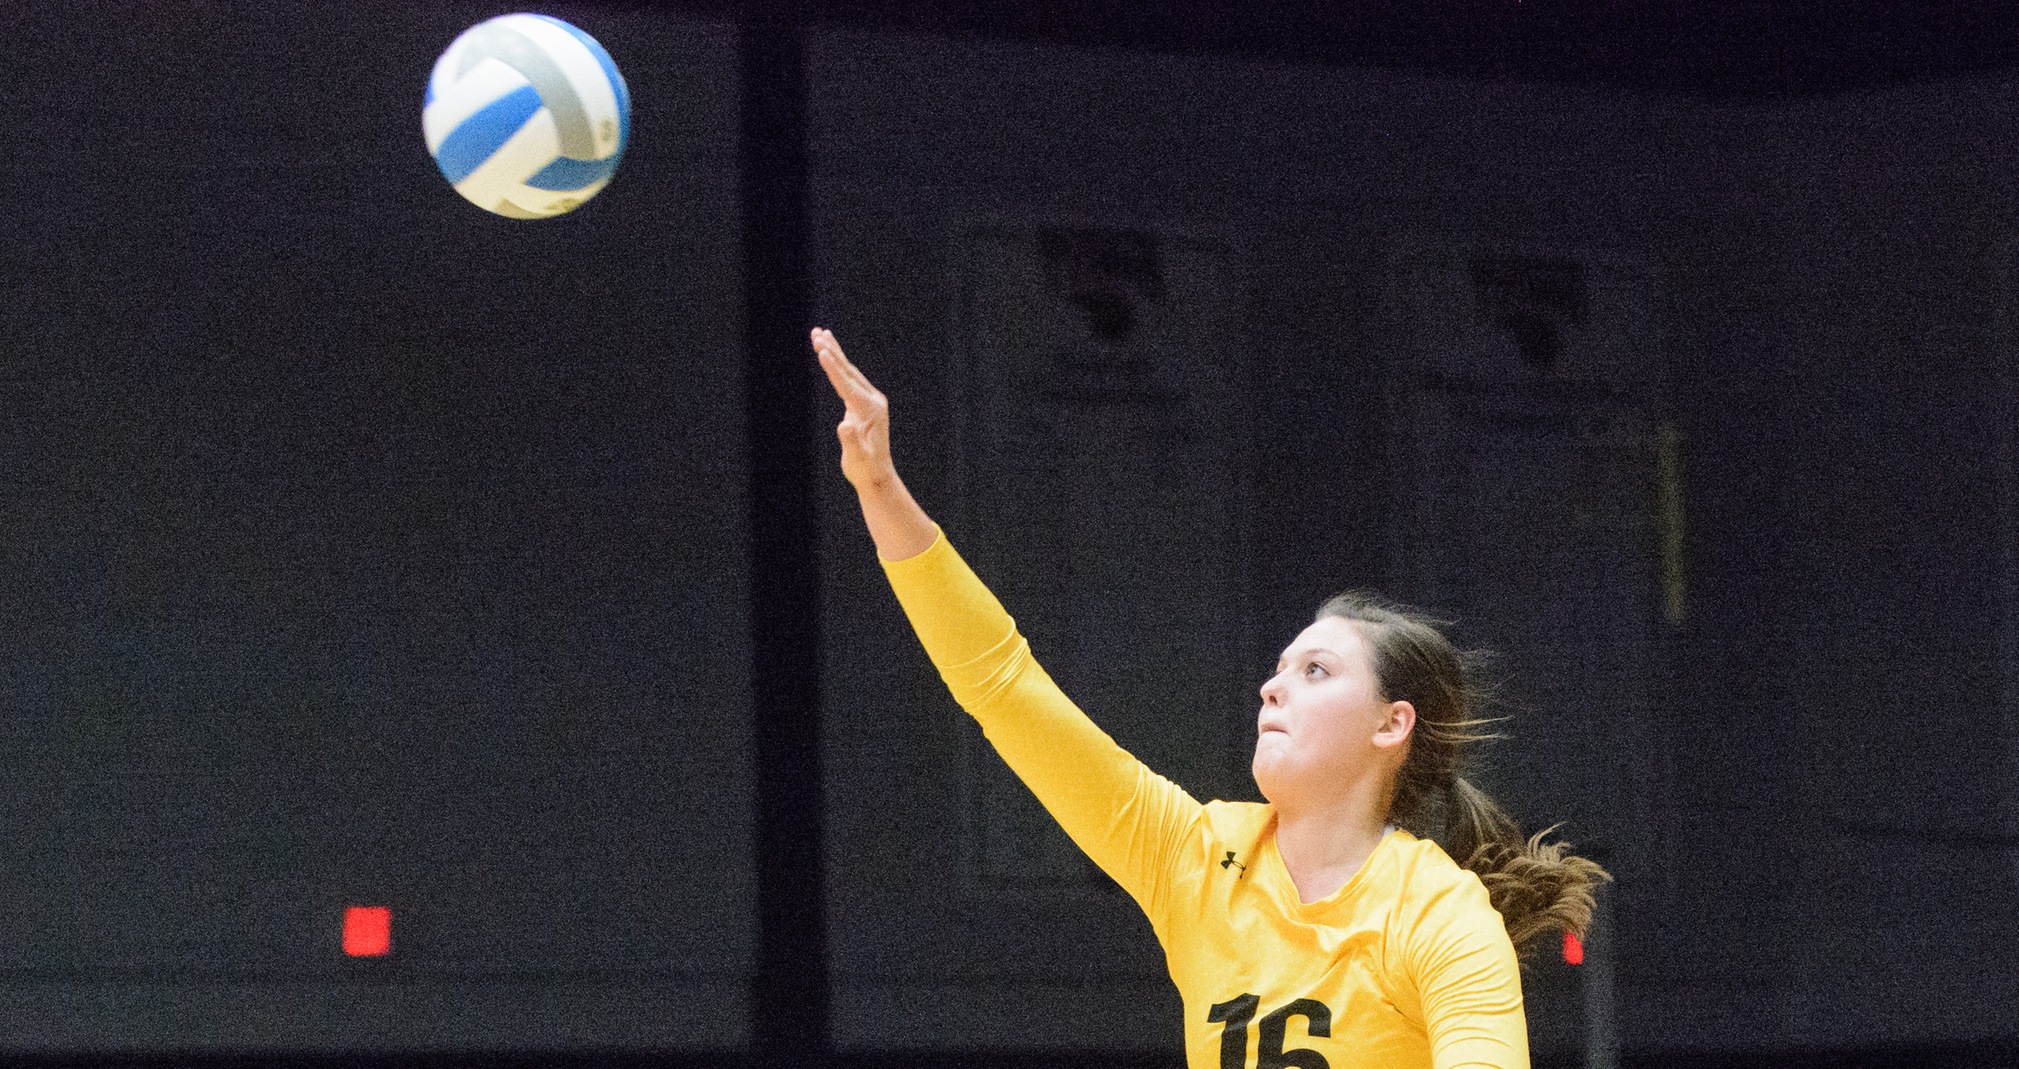 Carly Lemke hit .348 with eight kills and three block assists against the Pointers.